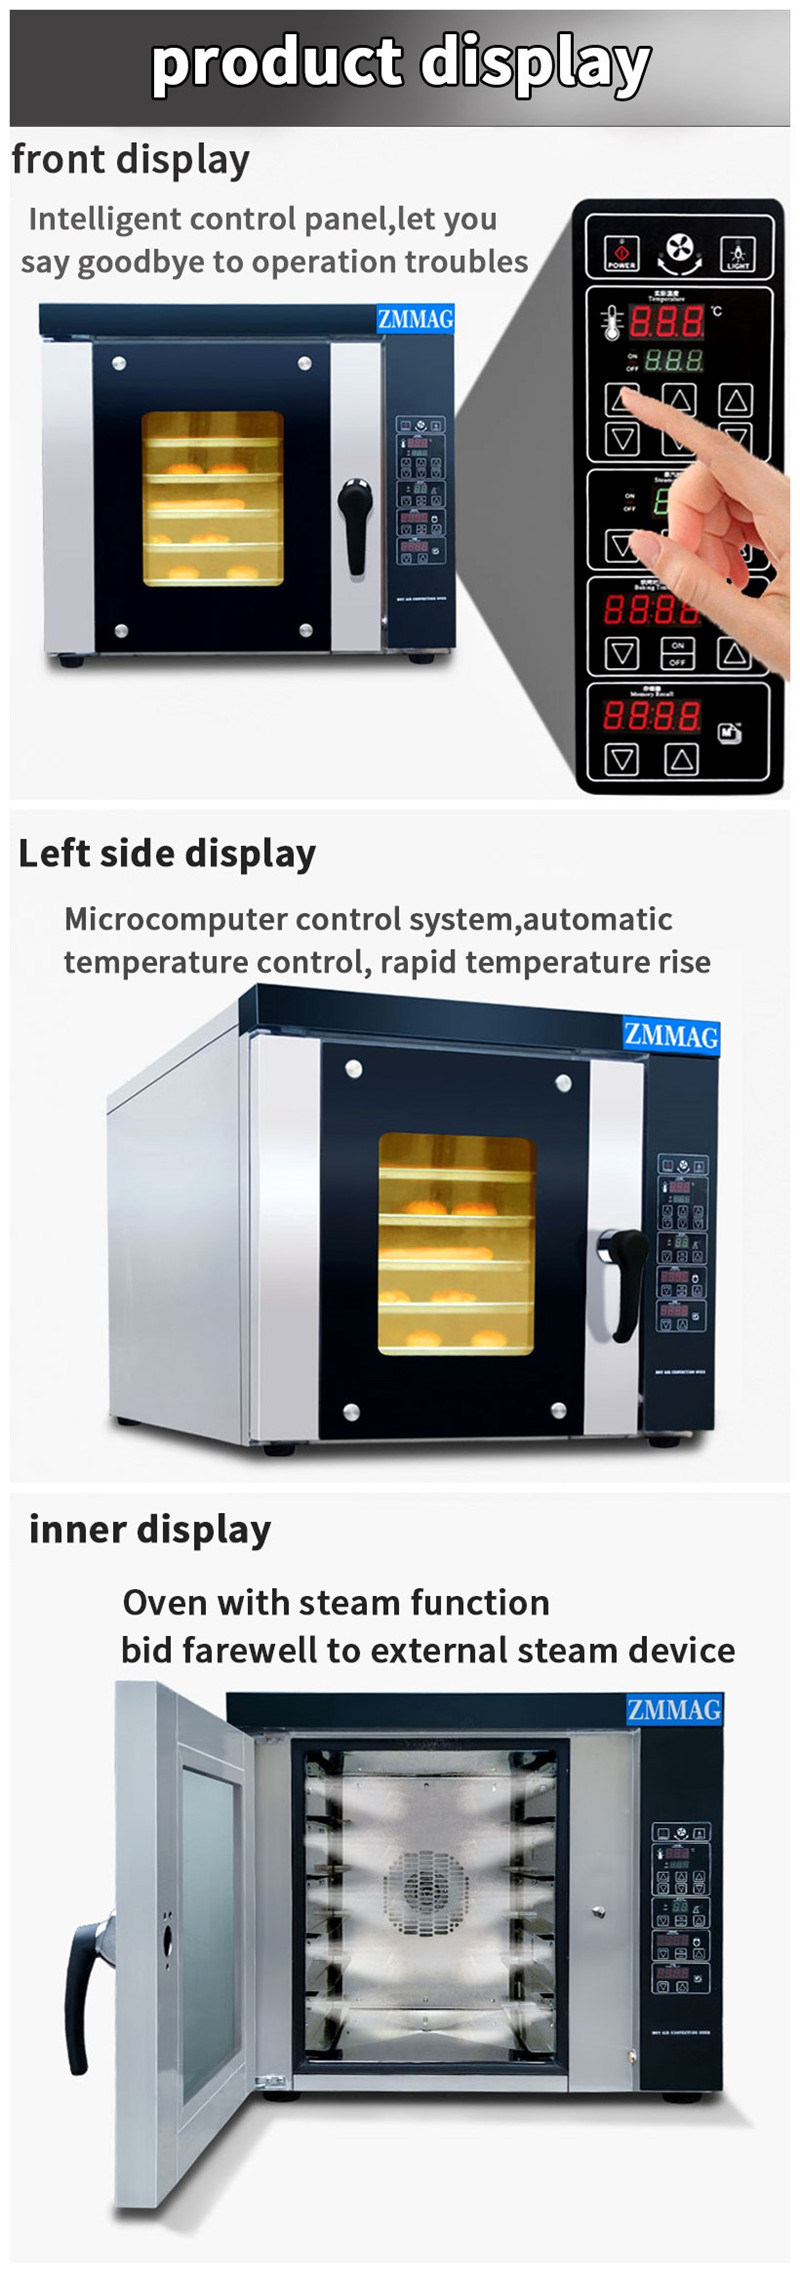 Mini Hot Air Convection Oven 220V Steamer Baking Machine for Sale (ZMR-5M)